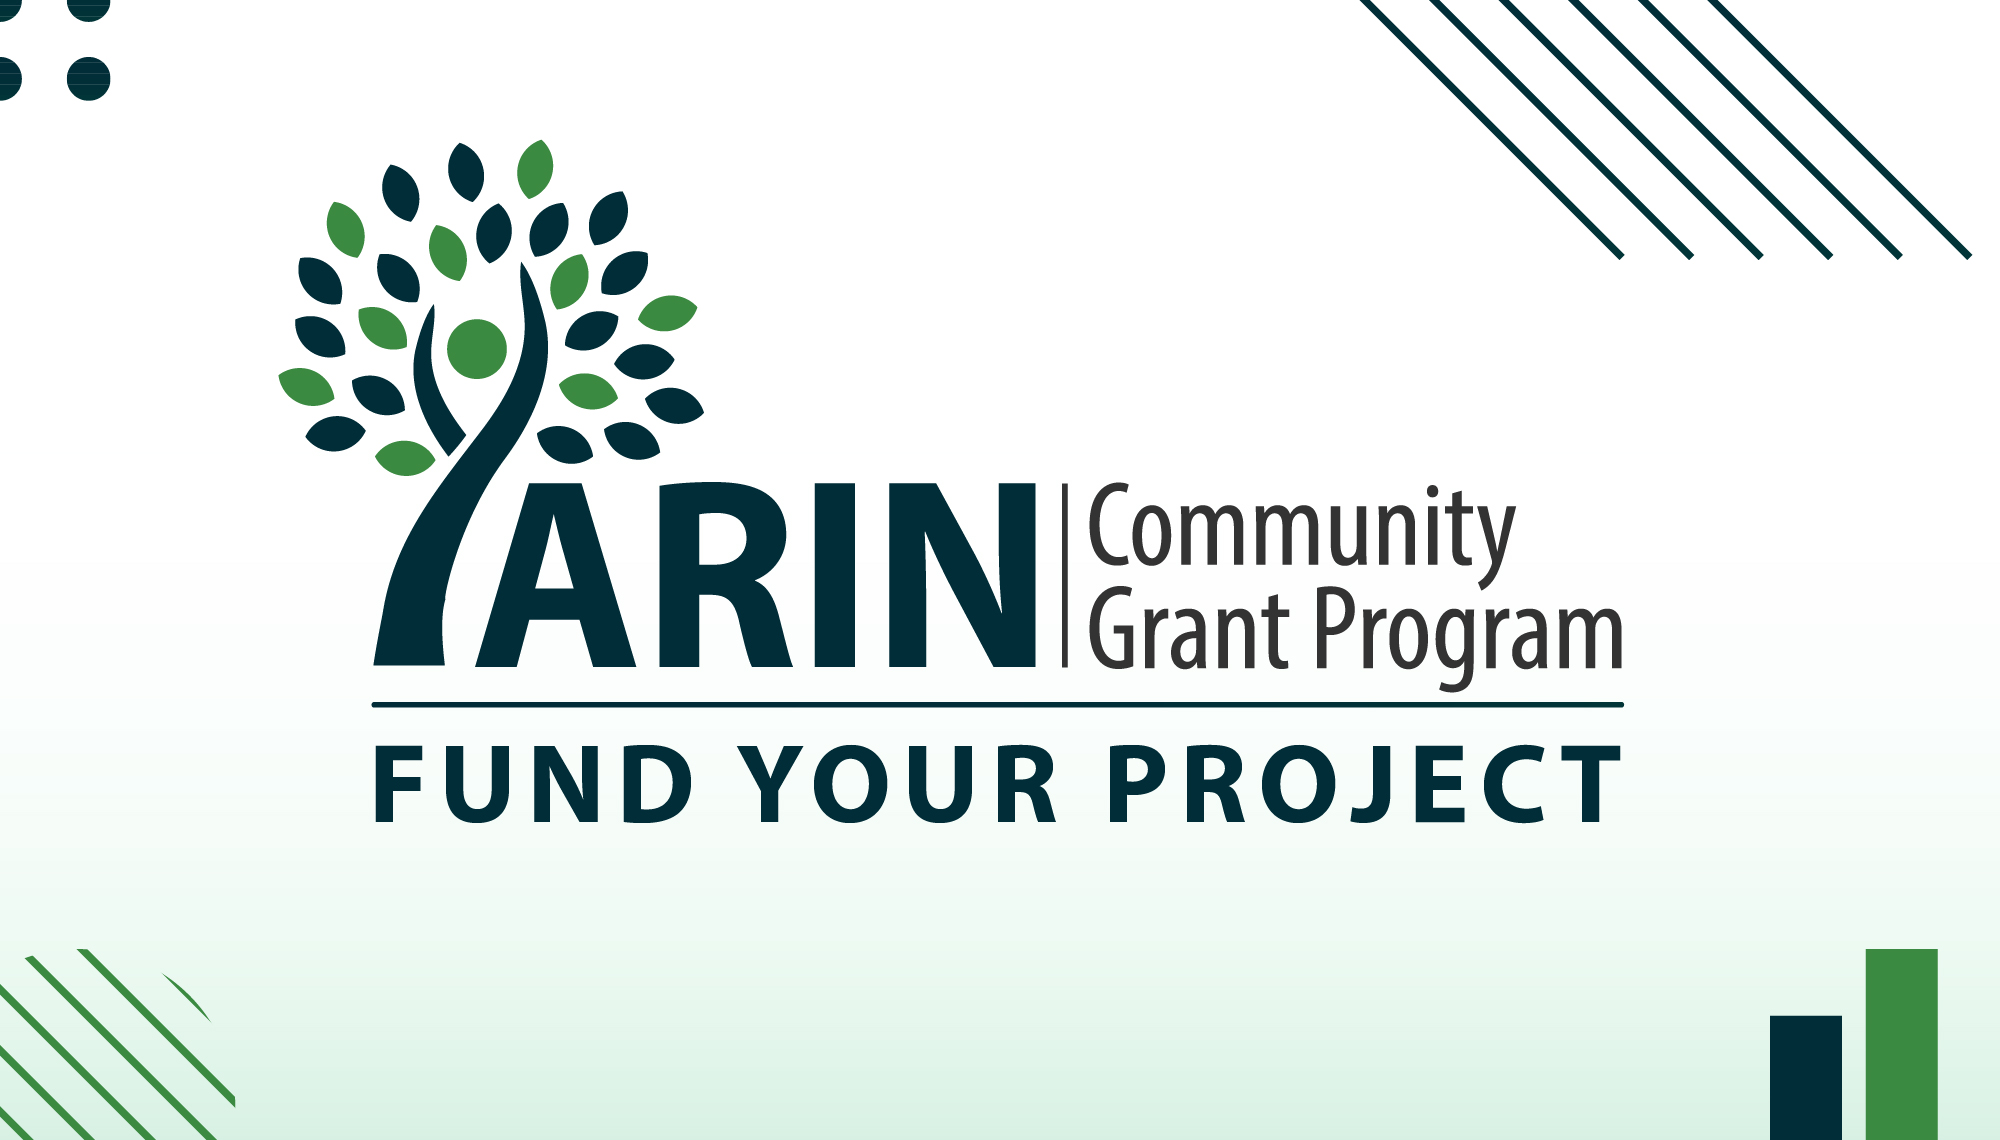 Fund Your Project through the ARIN Community Grant Program